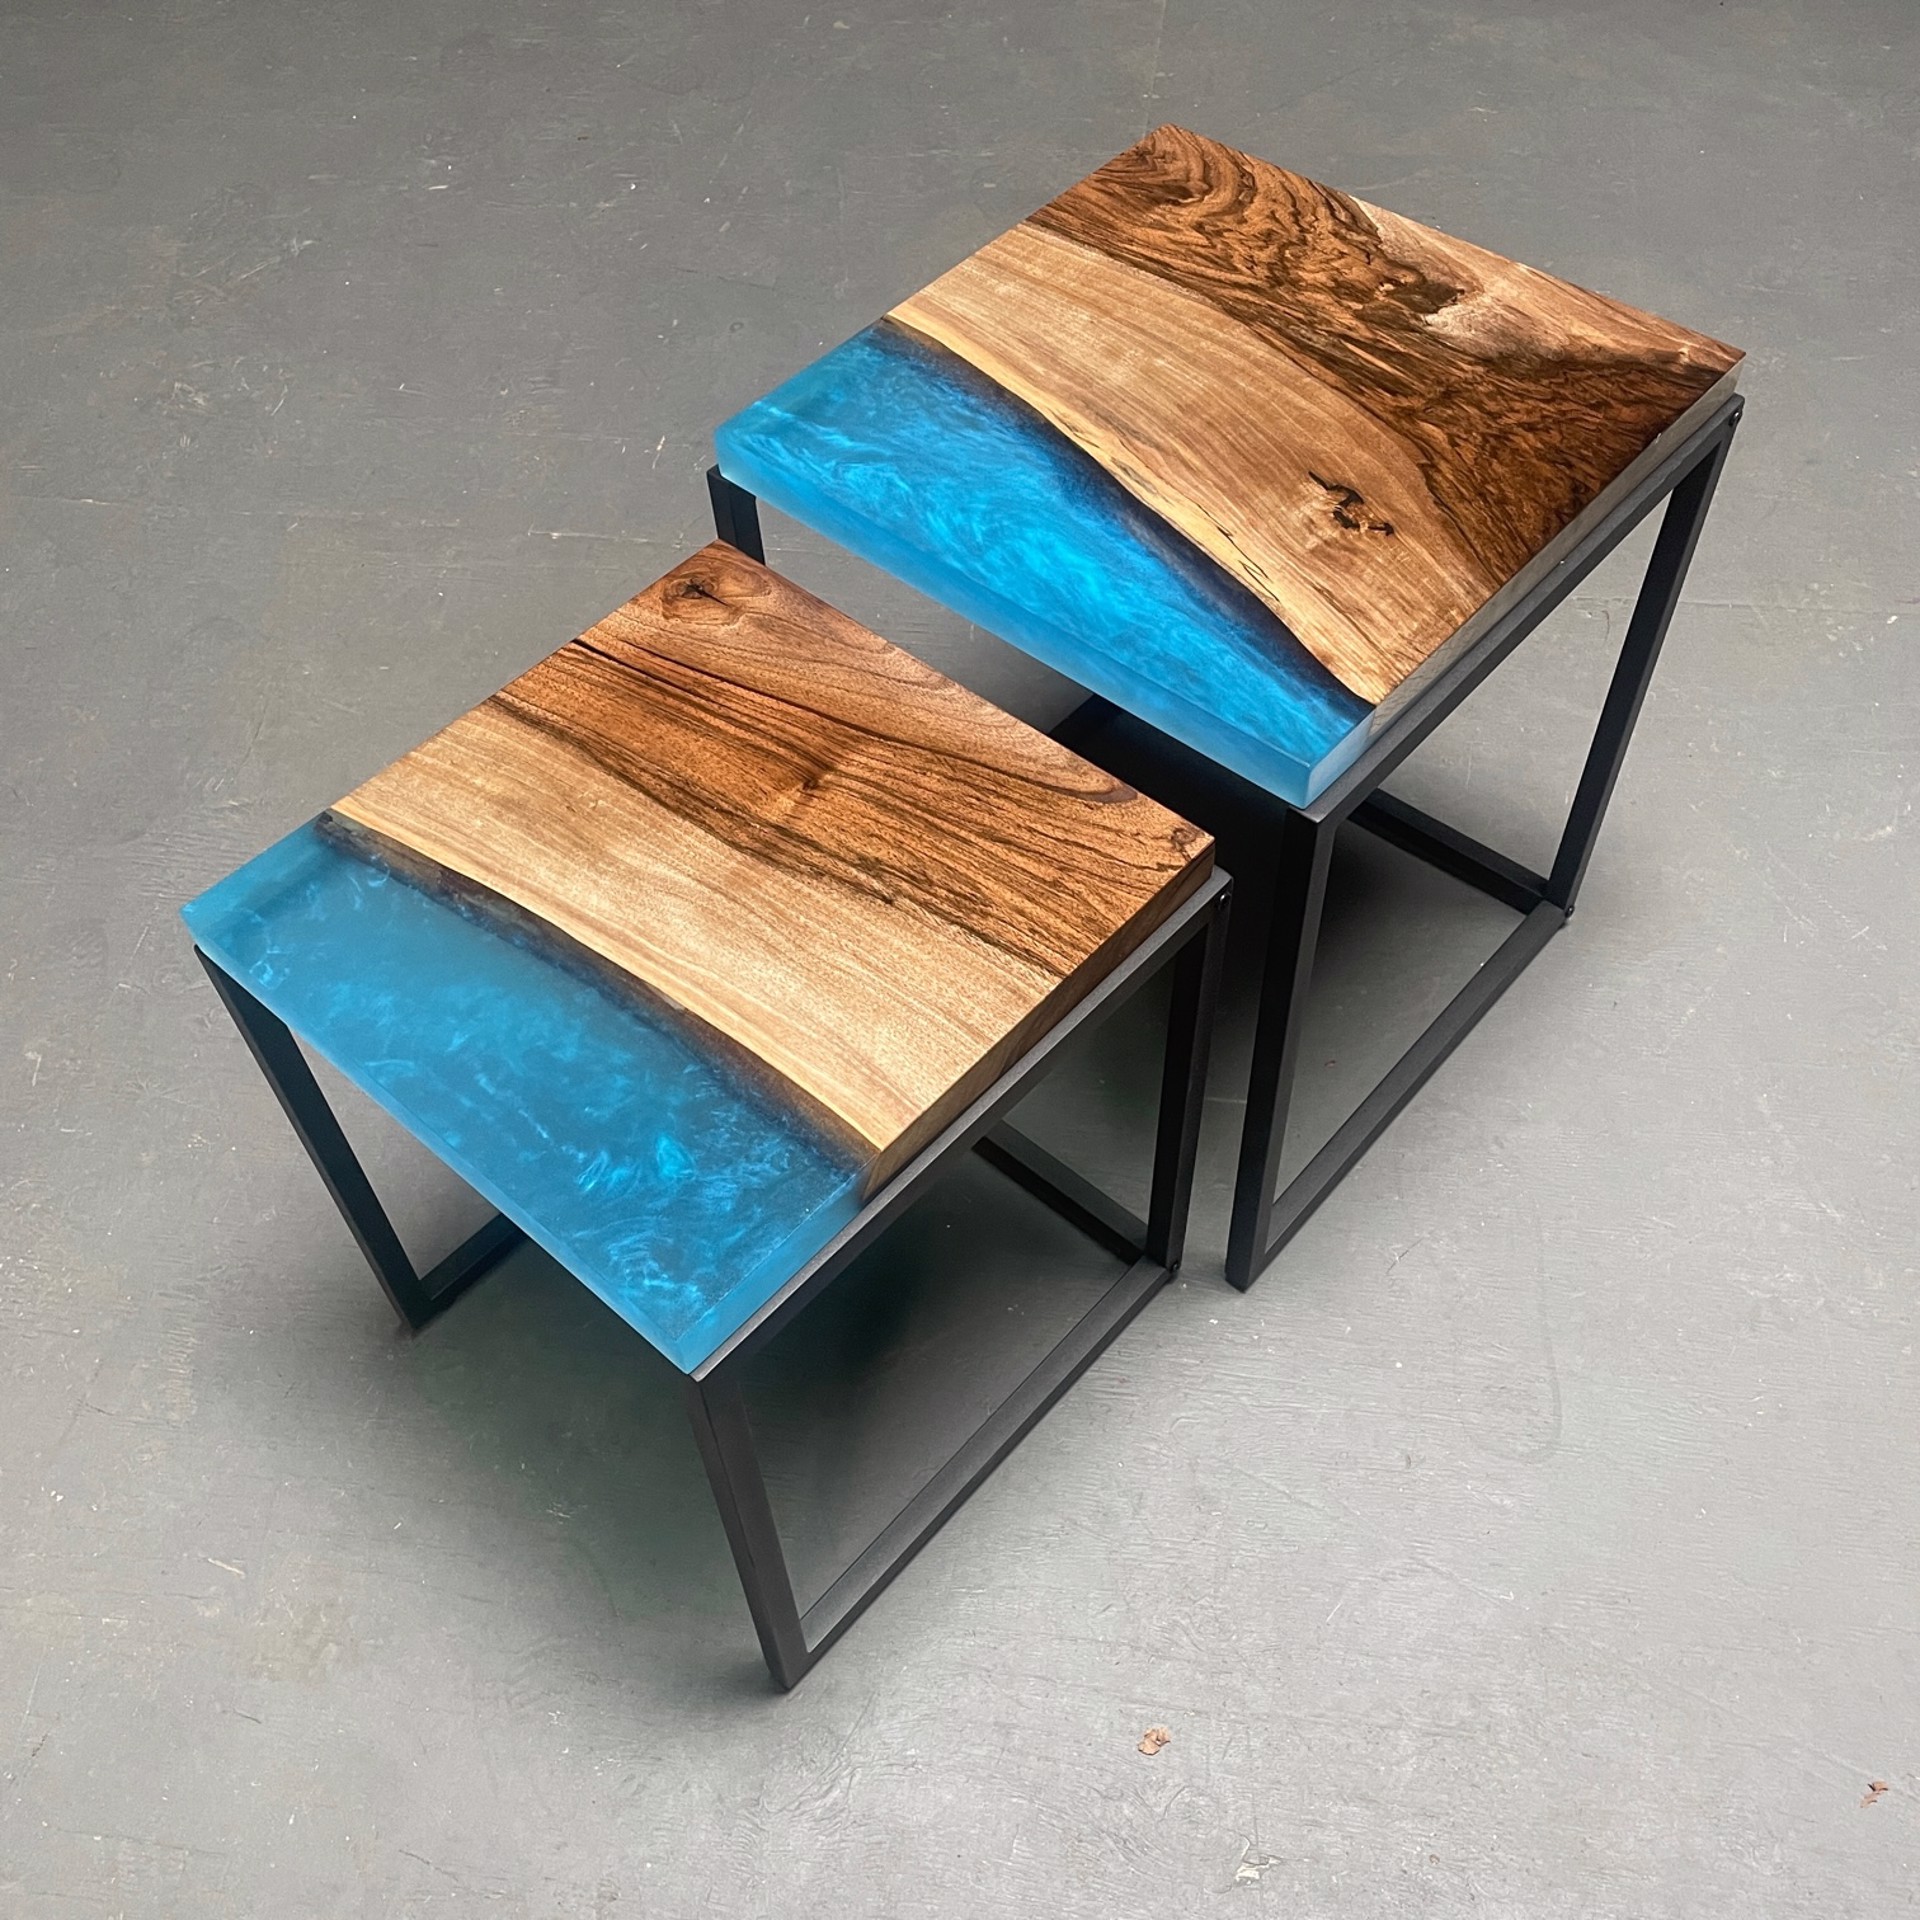 English in Maui Blue Nesting Tables by Benjamin McLaughlin